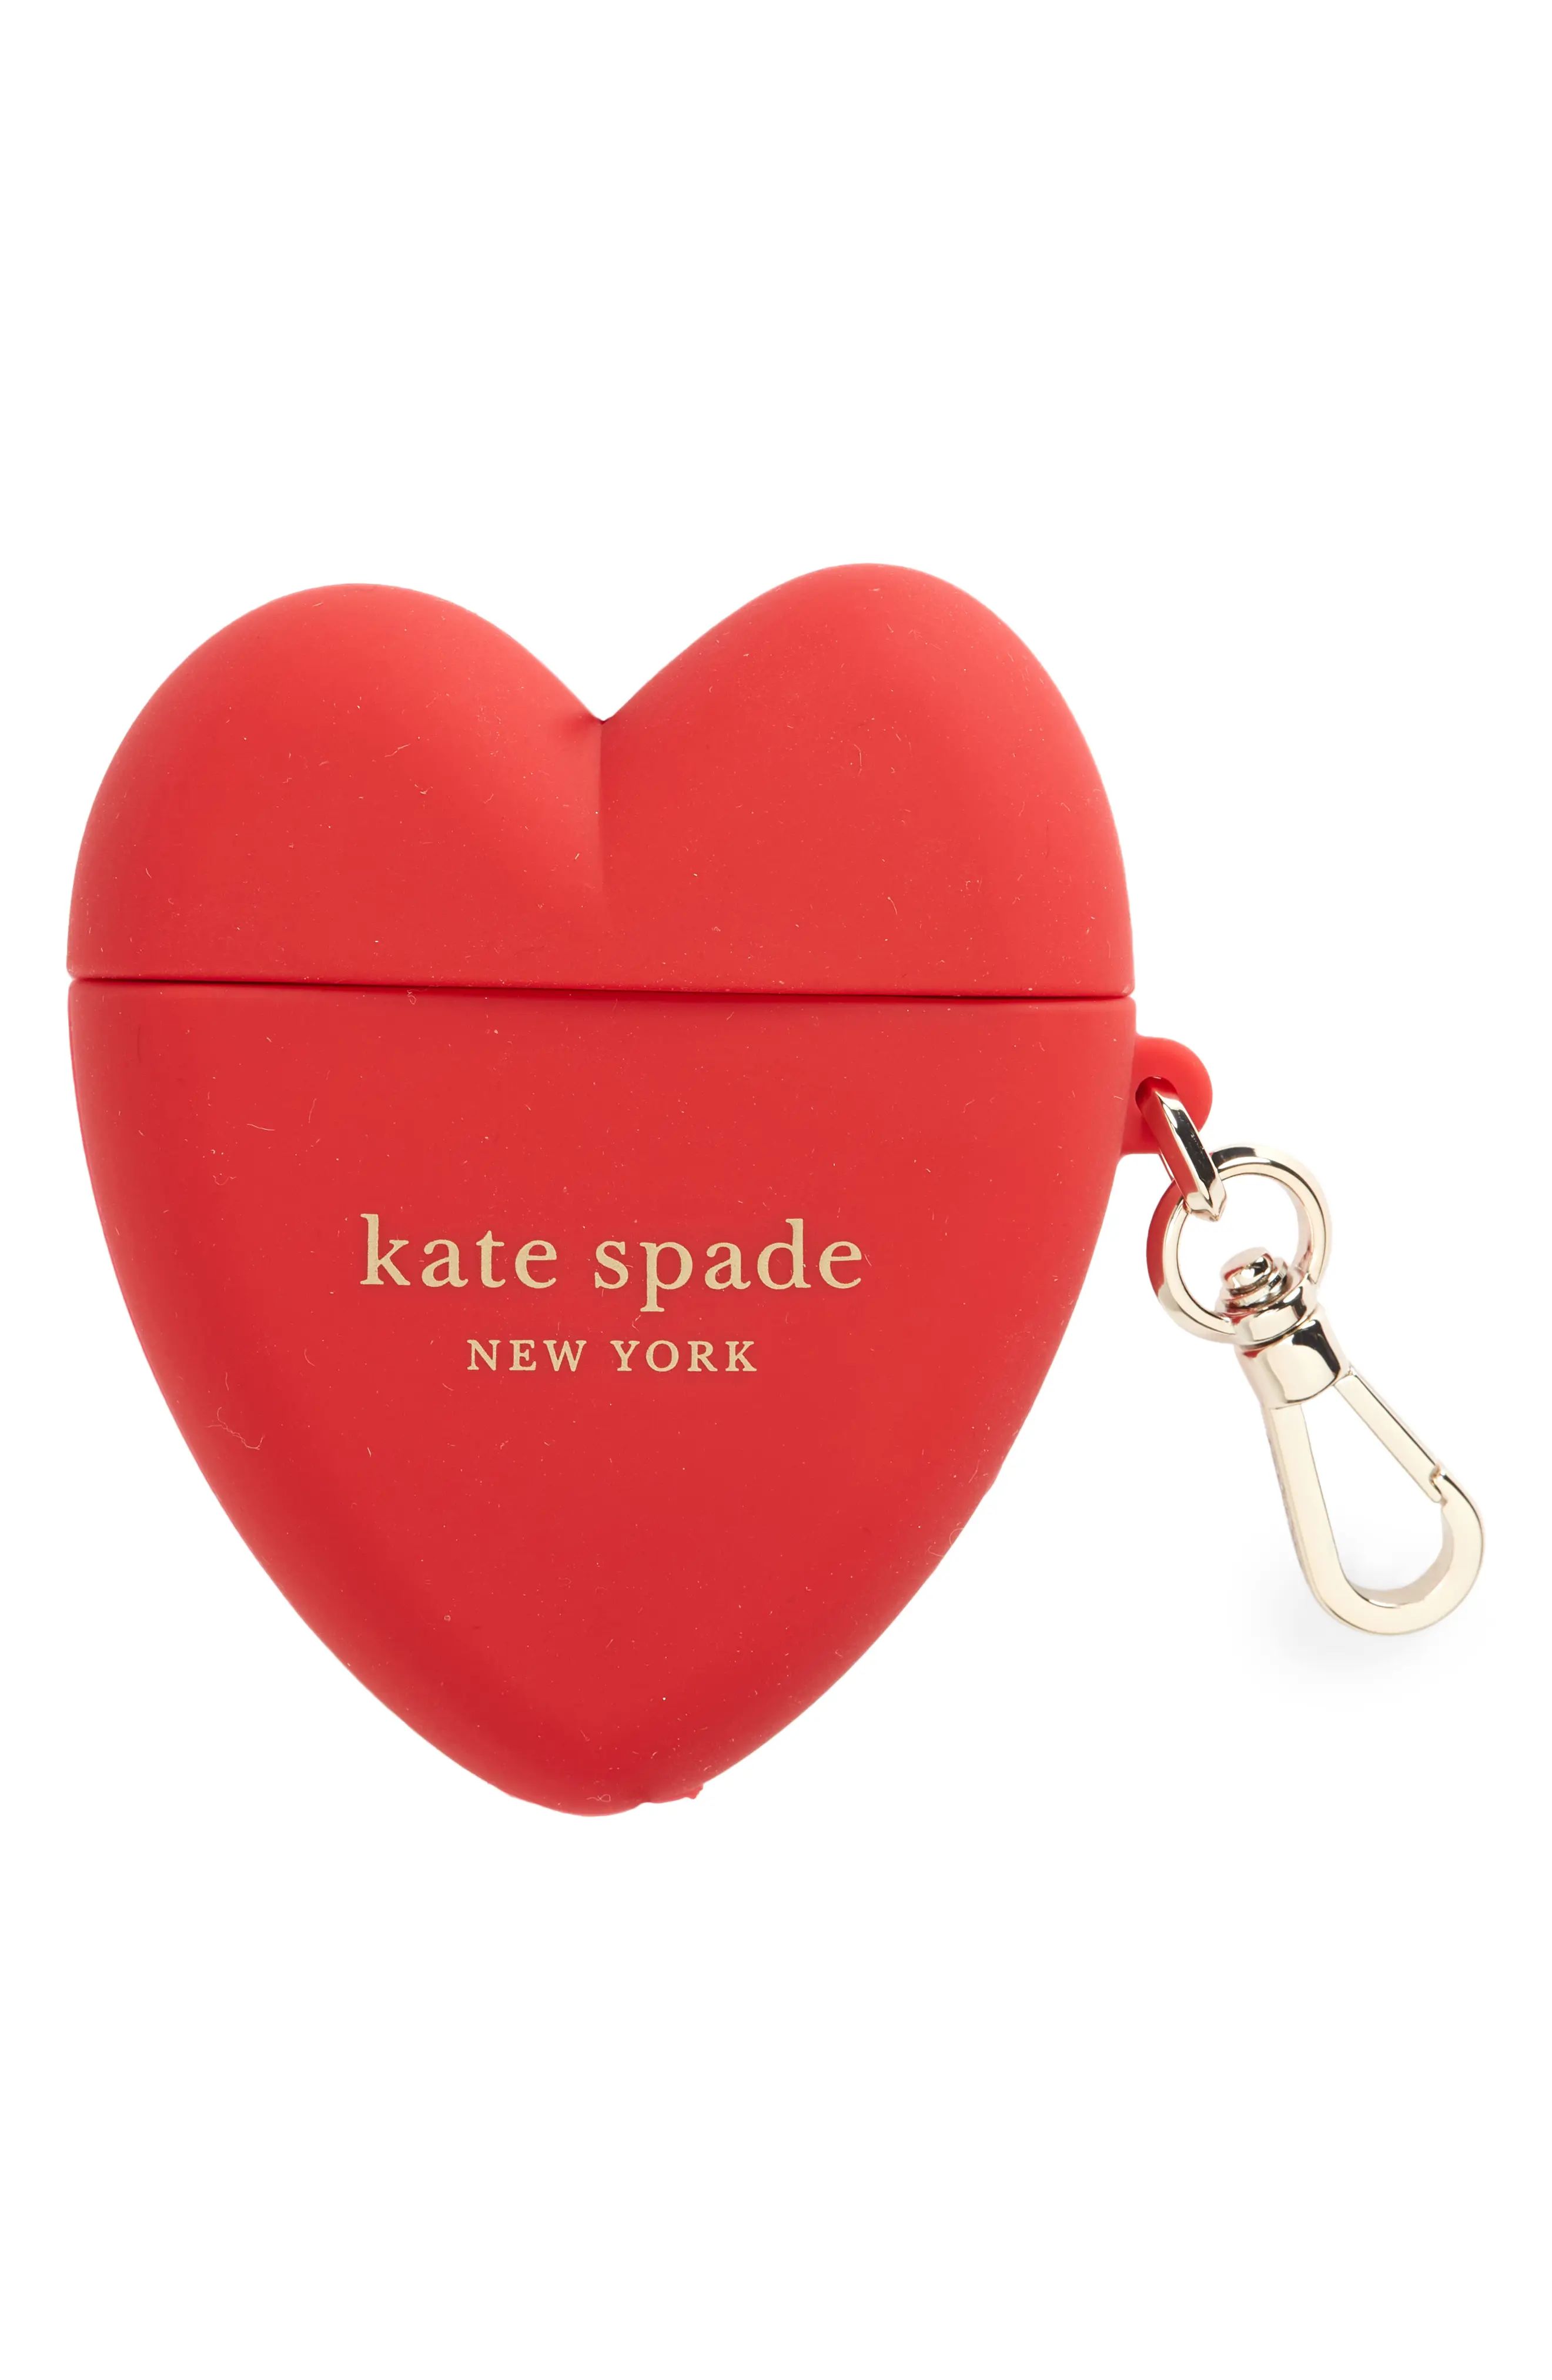 kate spade new york heart airpod case in Red at Nordstrom | Nordstrom